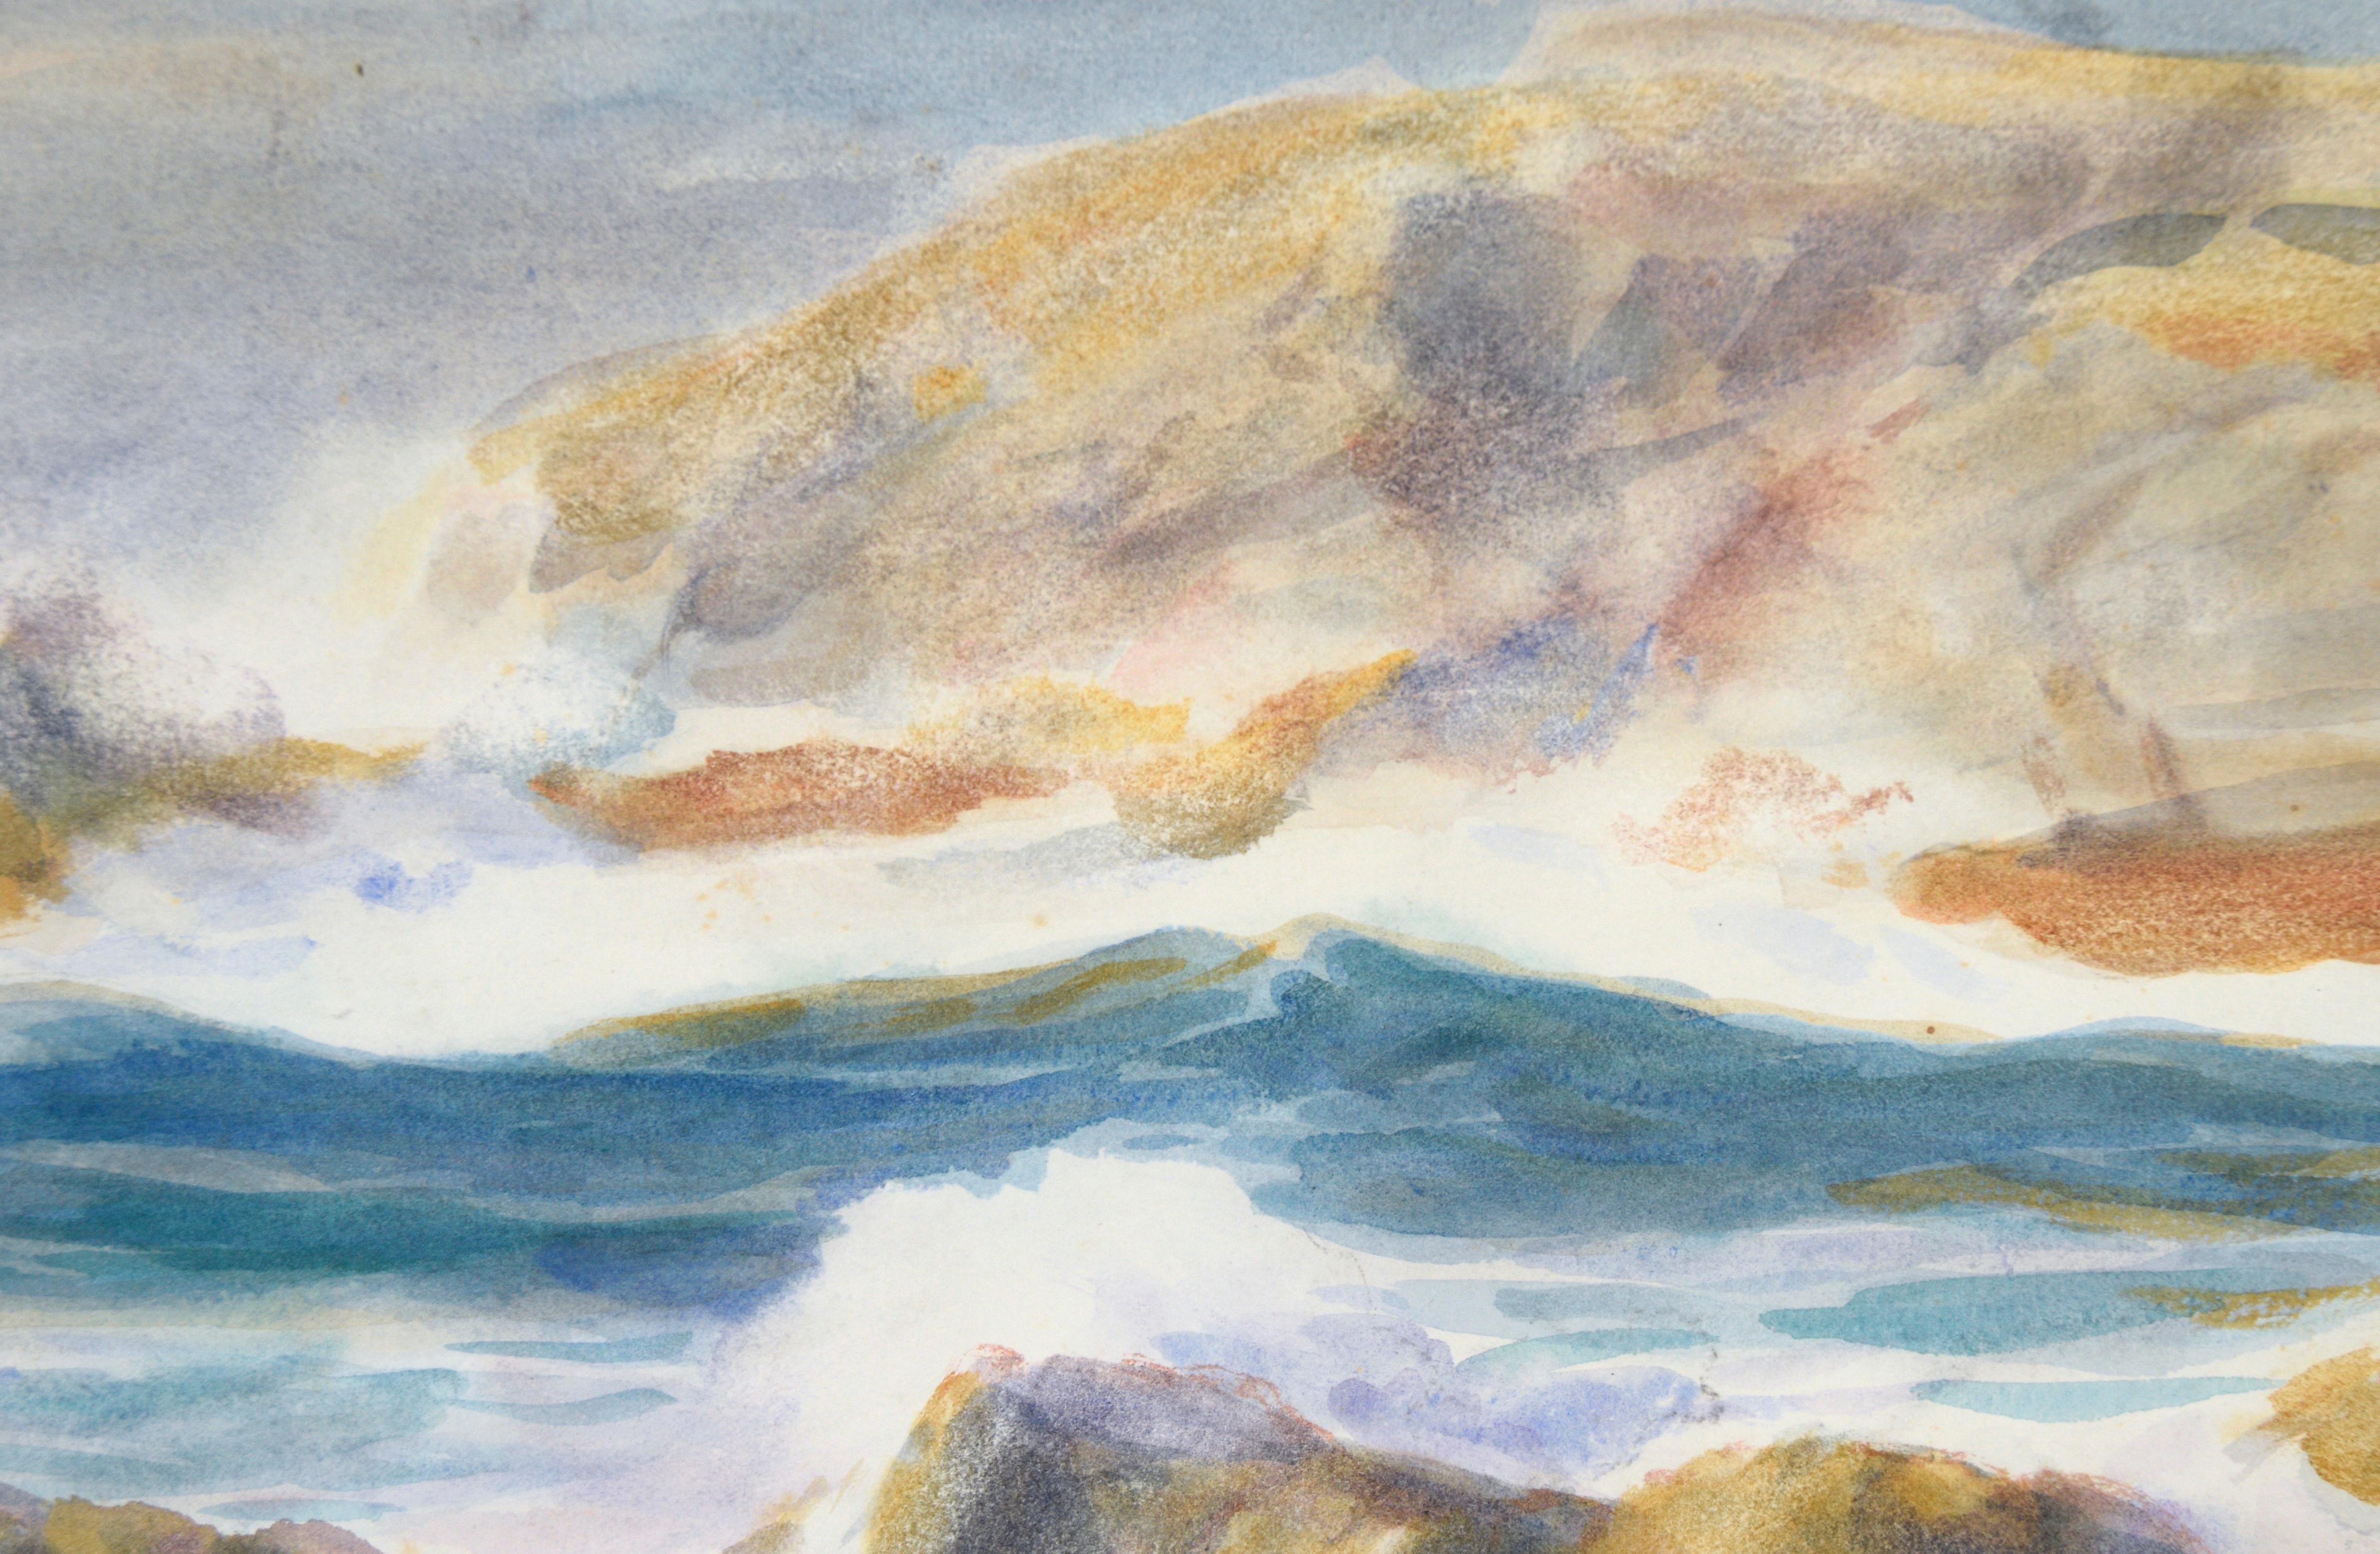 Rocky California Seascape in Watercolor on Paper

Dramatic coastal landscape by notable artist Paul Dougherty (American, 1877-1947). Waves are churning and swirling around partially submerged rocks. Dougherty has used negative space to show the